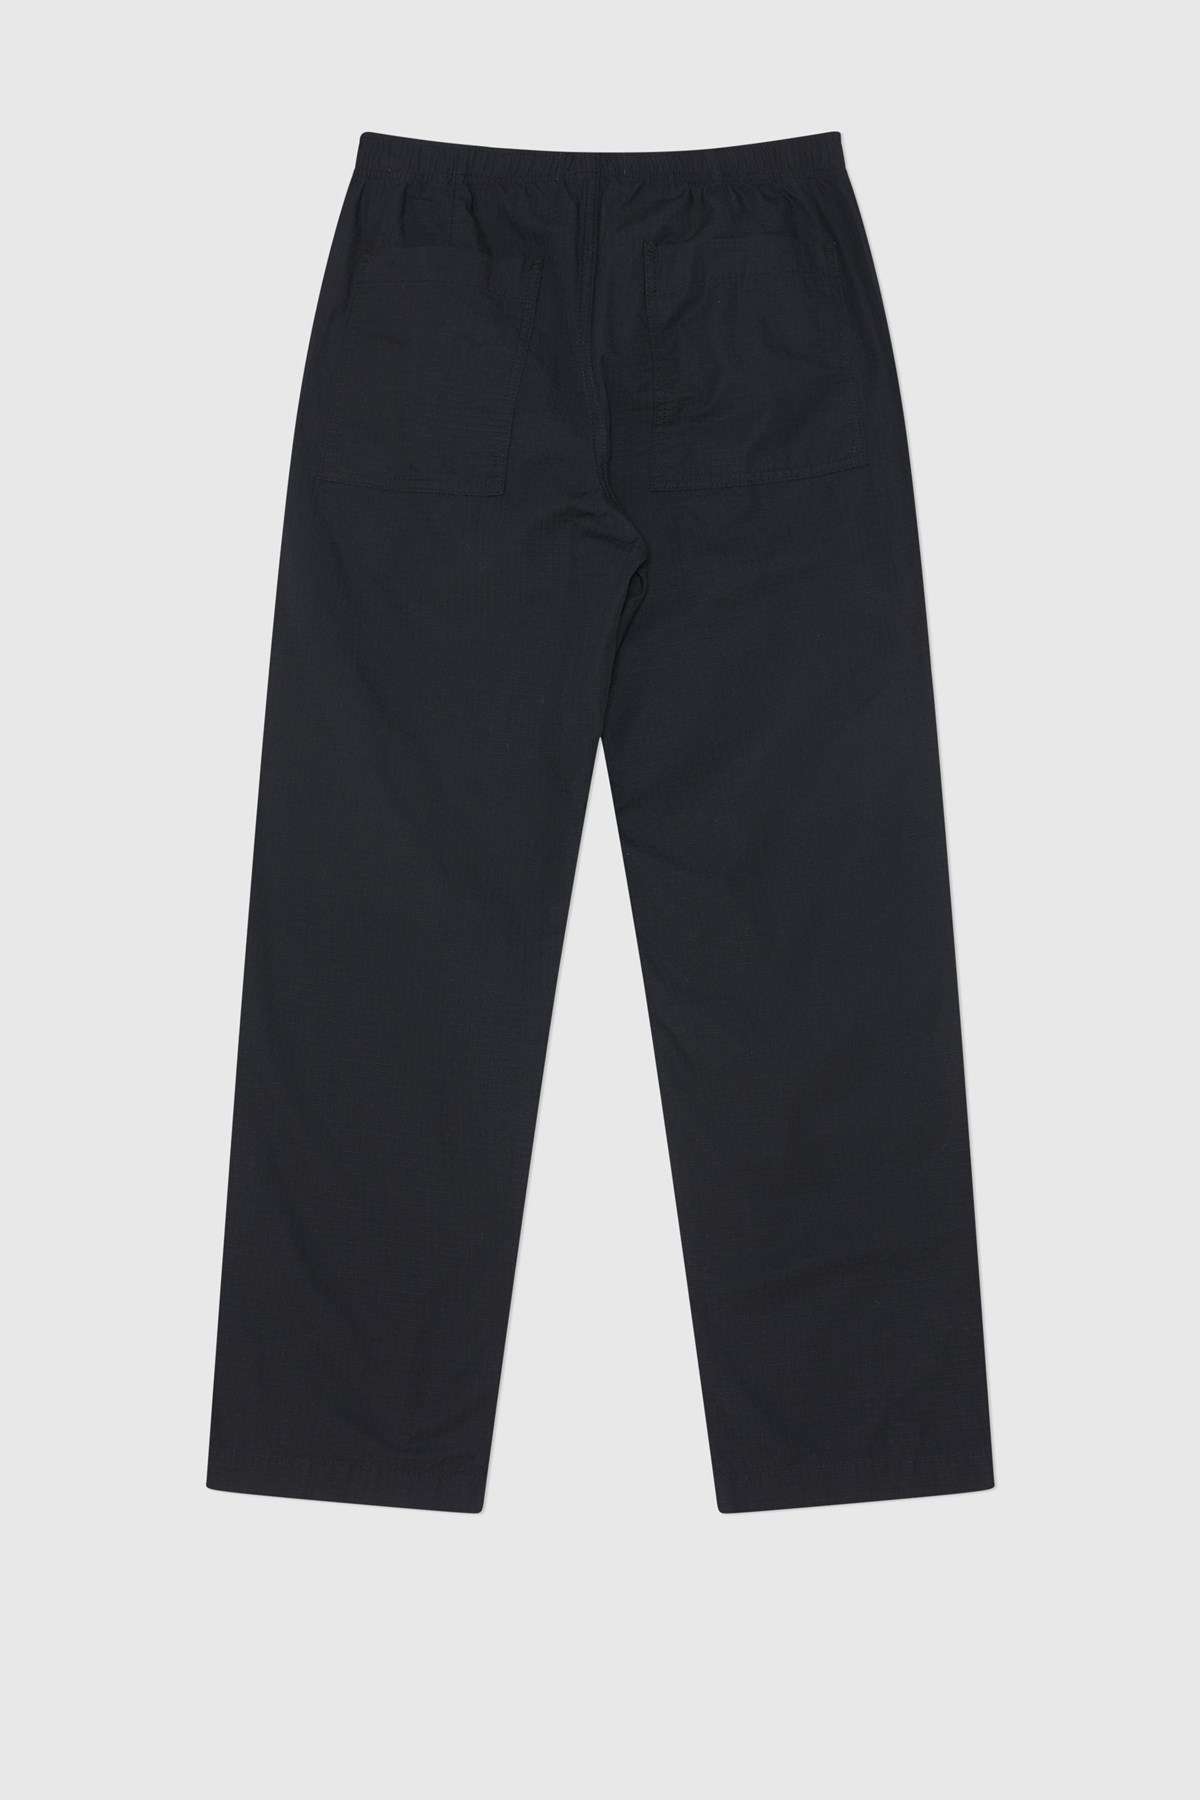 Double A by Wood Wood Lee ripstop trousers Black | WoodWood.com